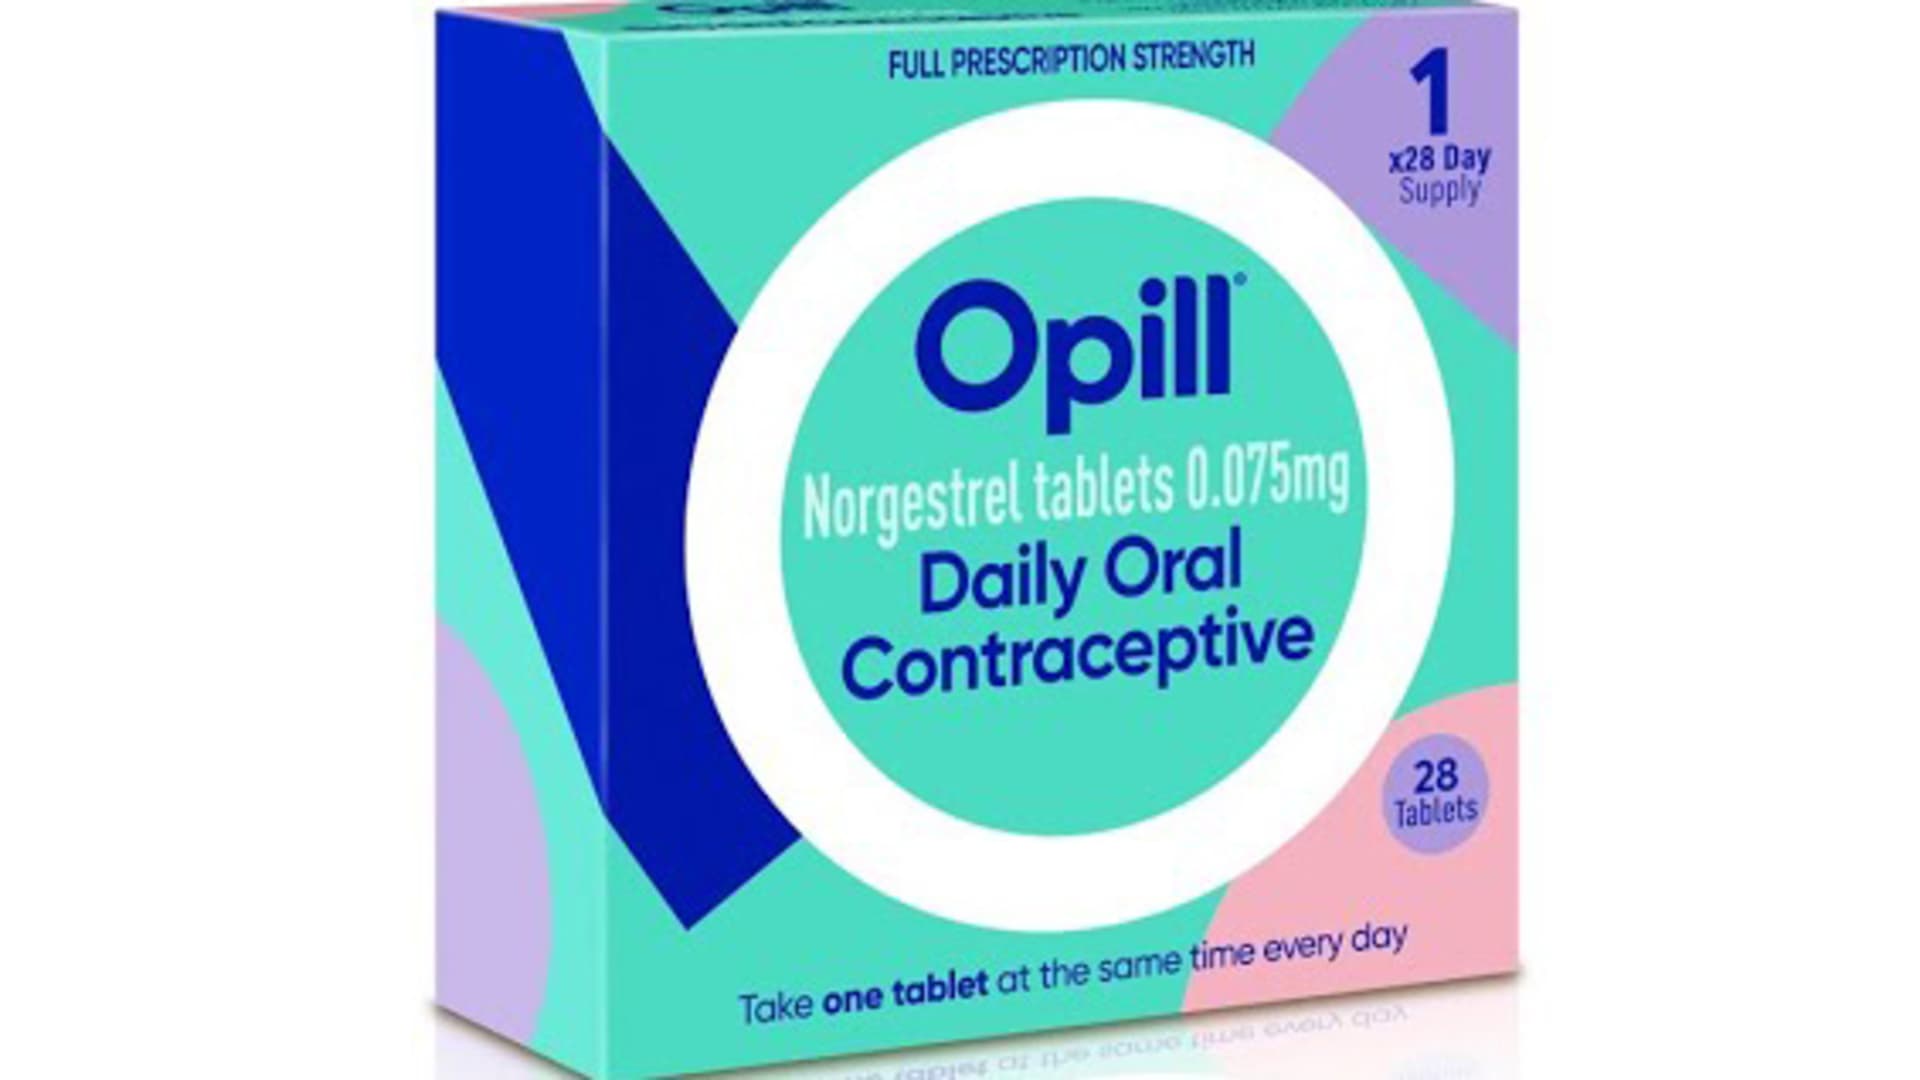 Over the counter birth control approved by the FDA